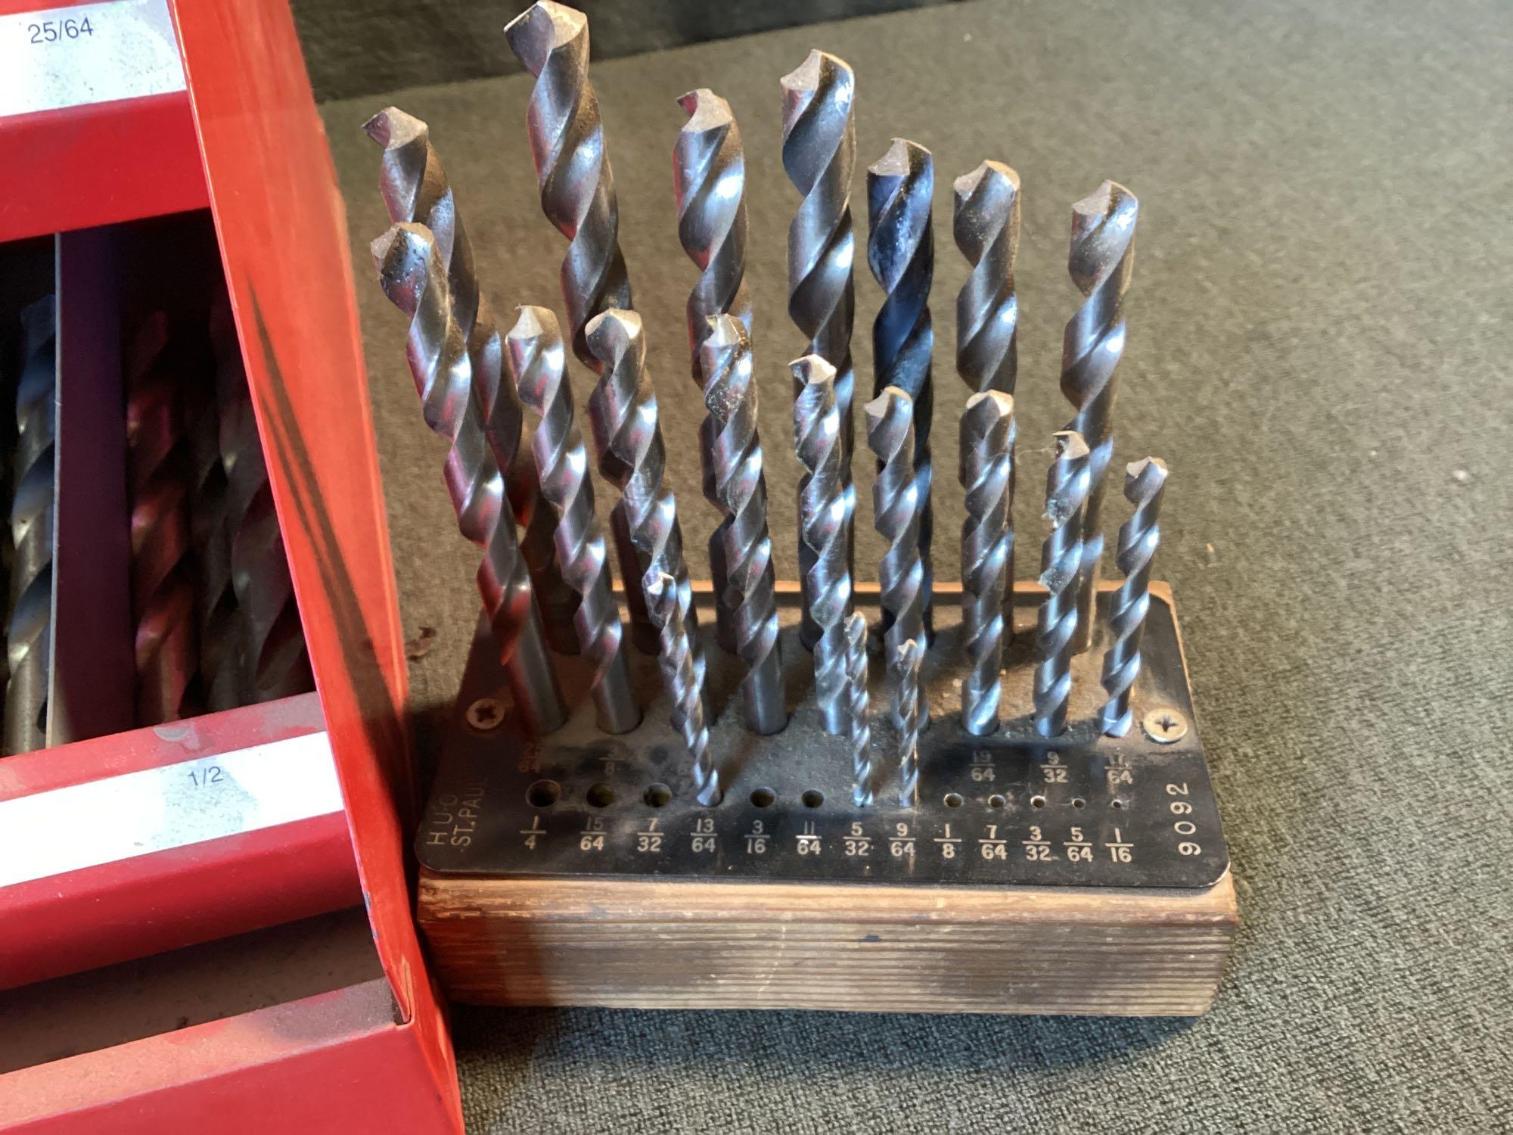 Image for Hout St Paul Metal Drill Bits in Shop Display